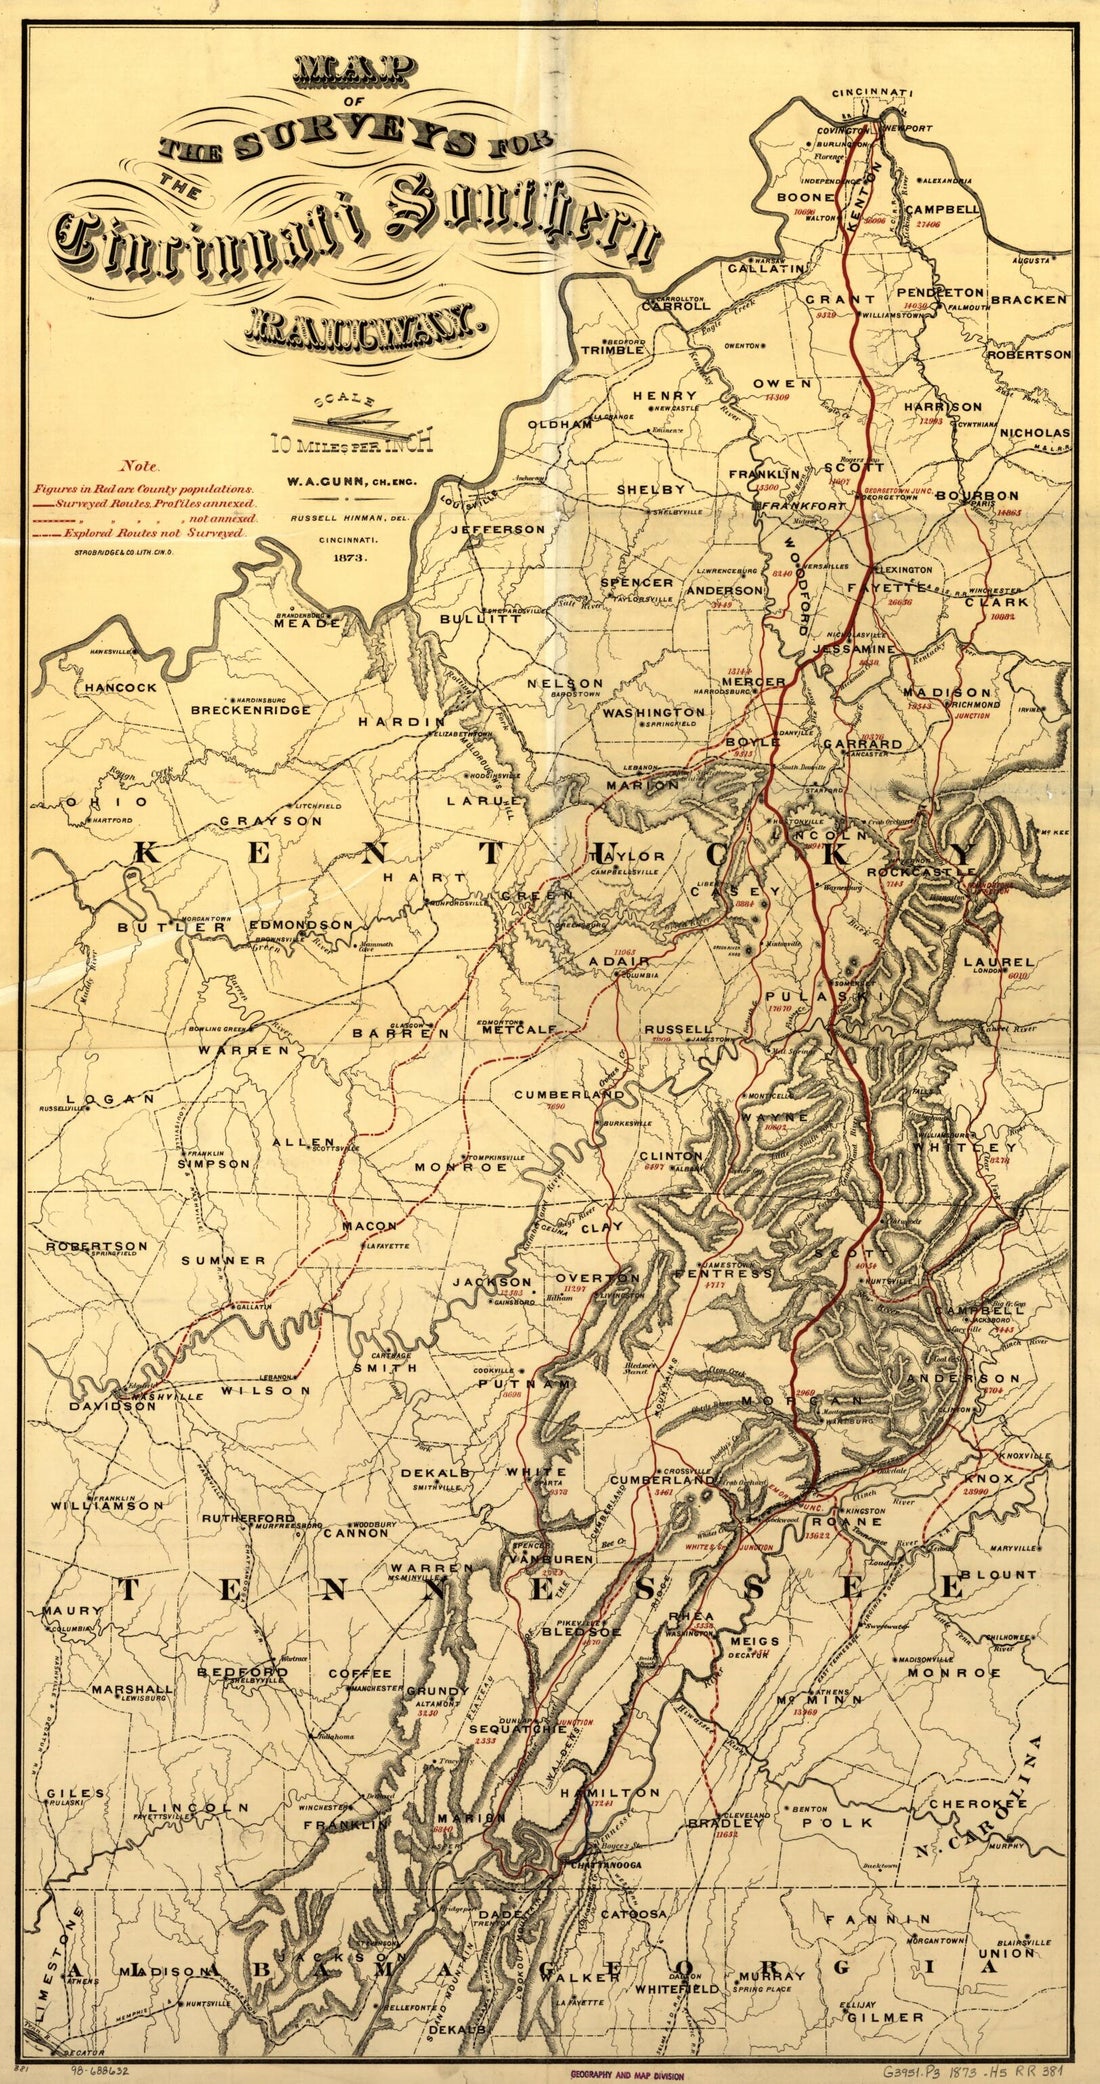 This old map of Map of the Surveys of the Cincinnati Railway, W.A. Gunn, Ch. Eng from 1873 was created by  Cincinnati Railway, Russell Hinamn in 1873